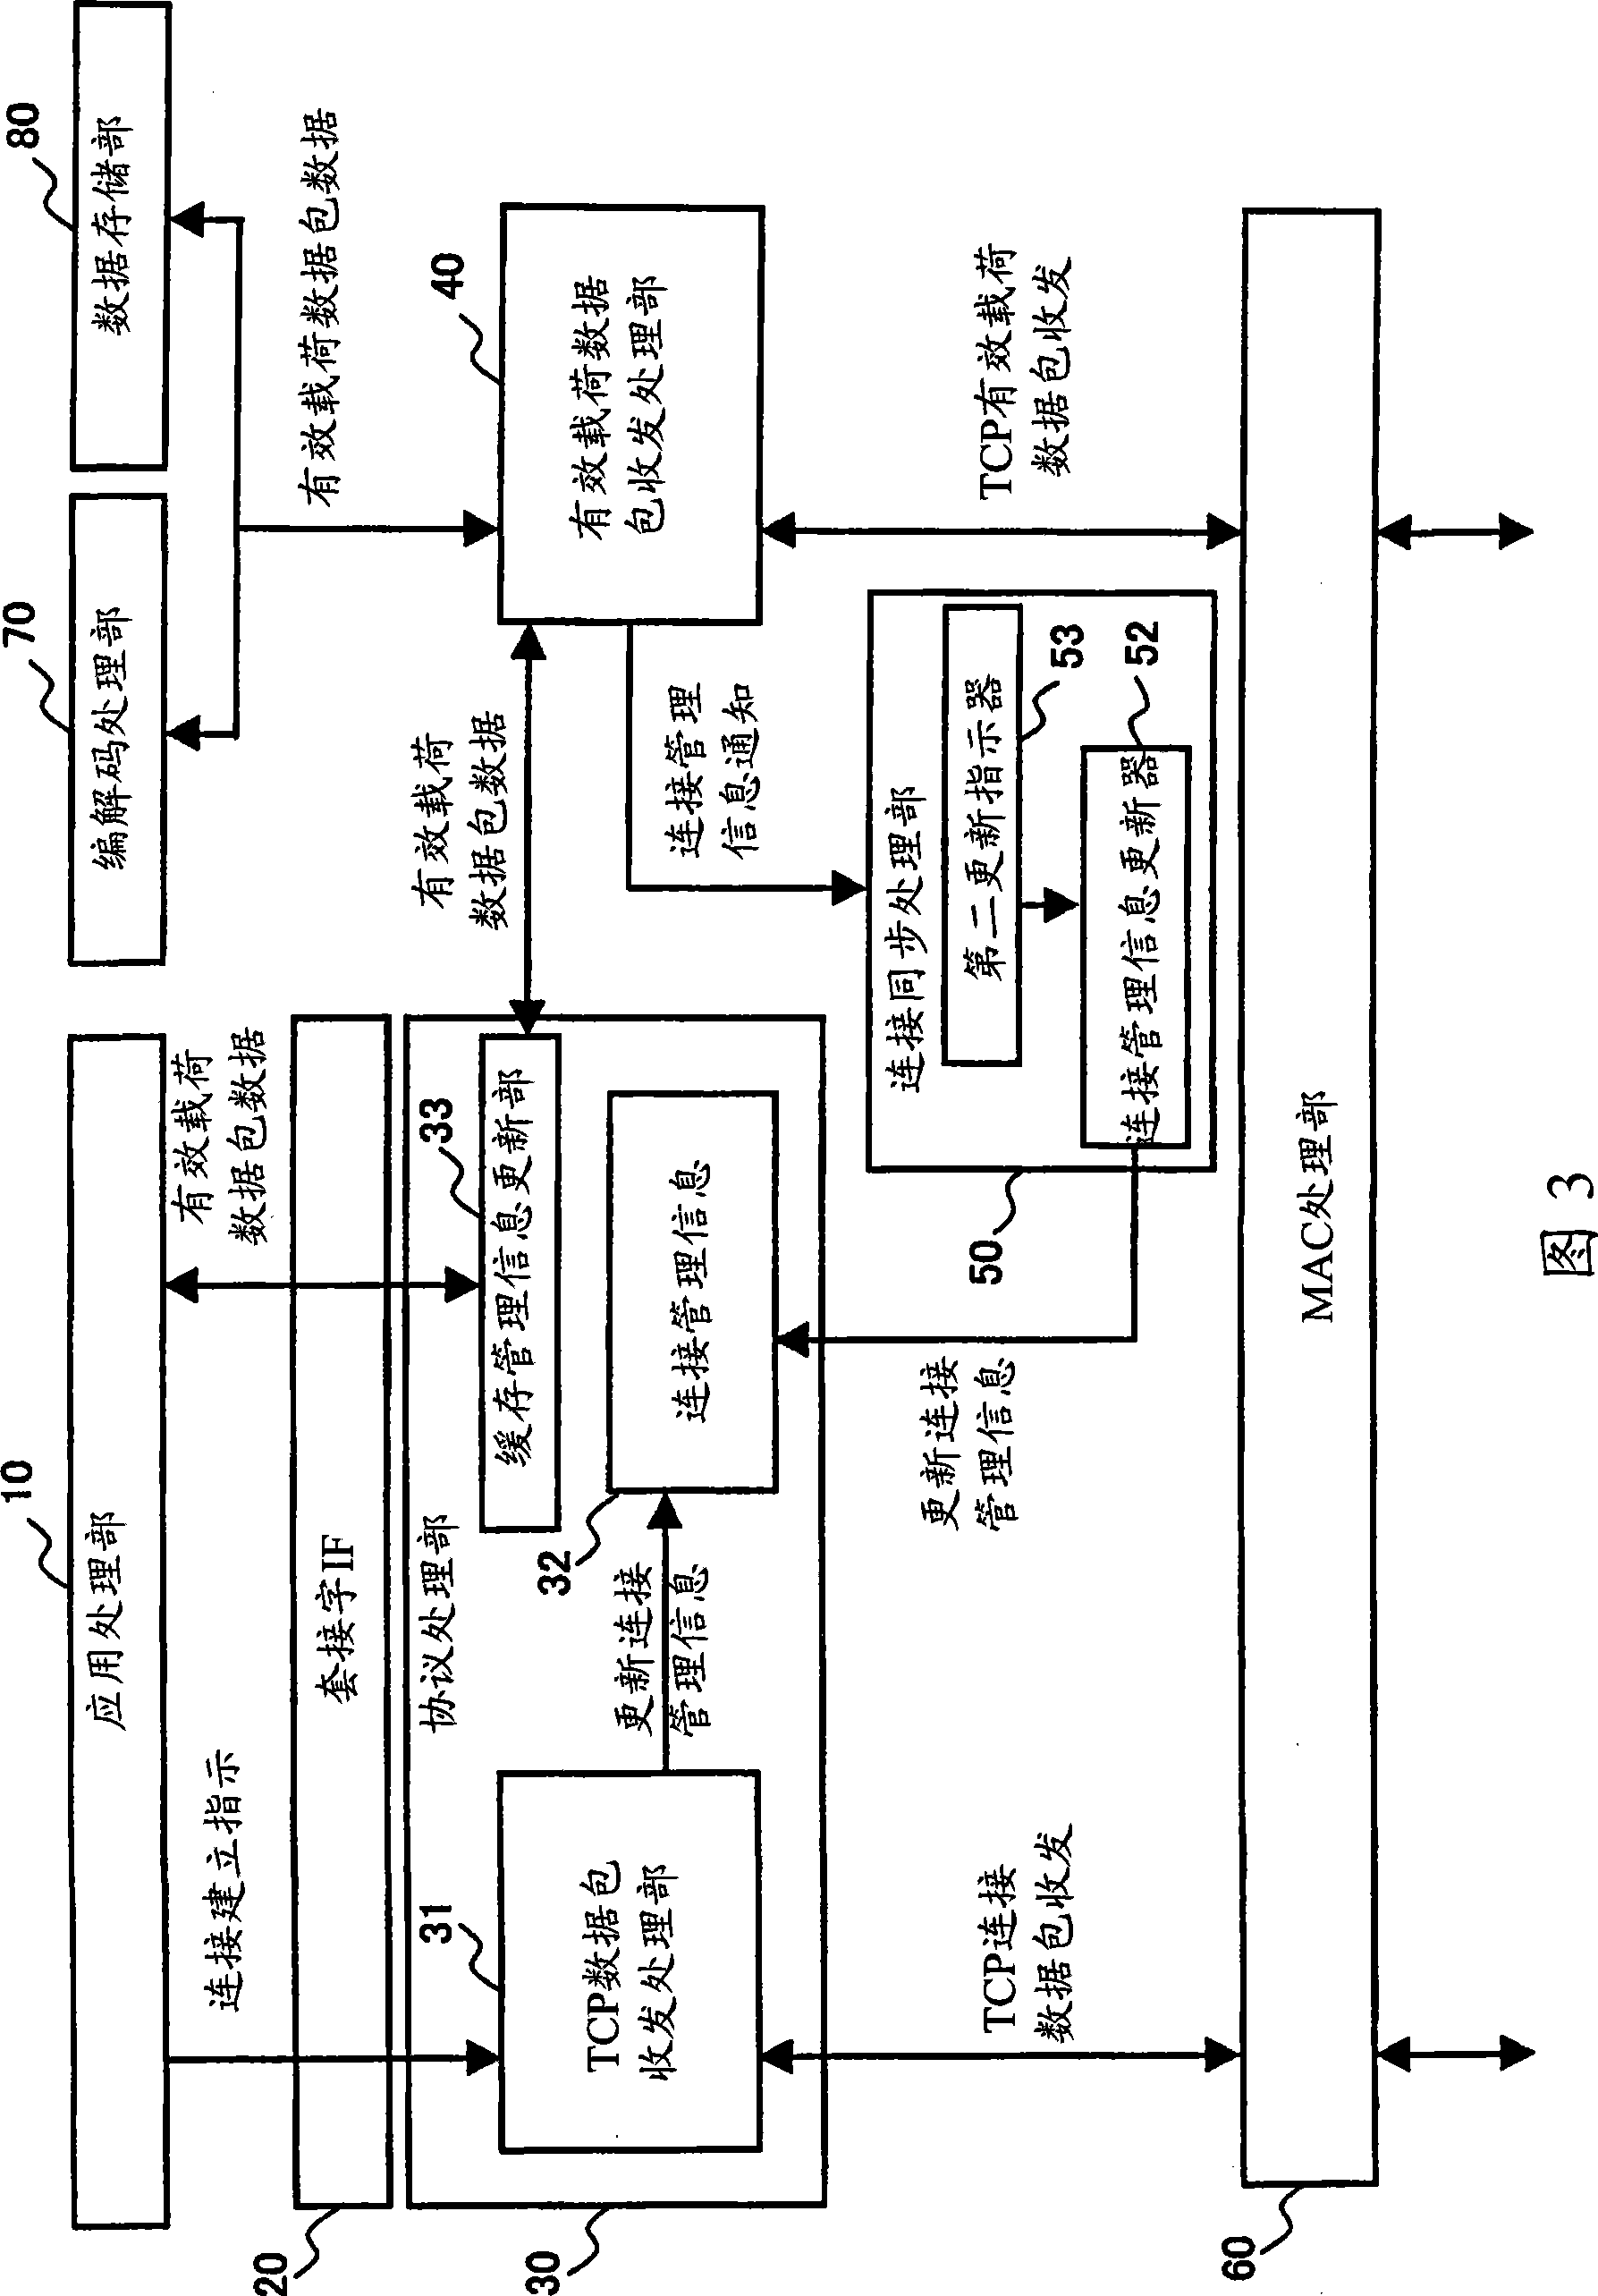 TCP packet communication device and techniques related thereto